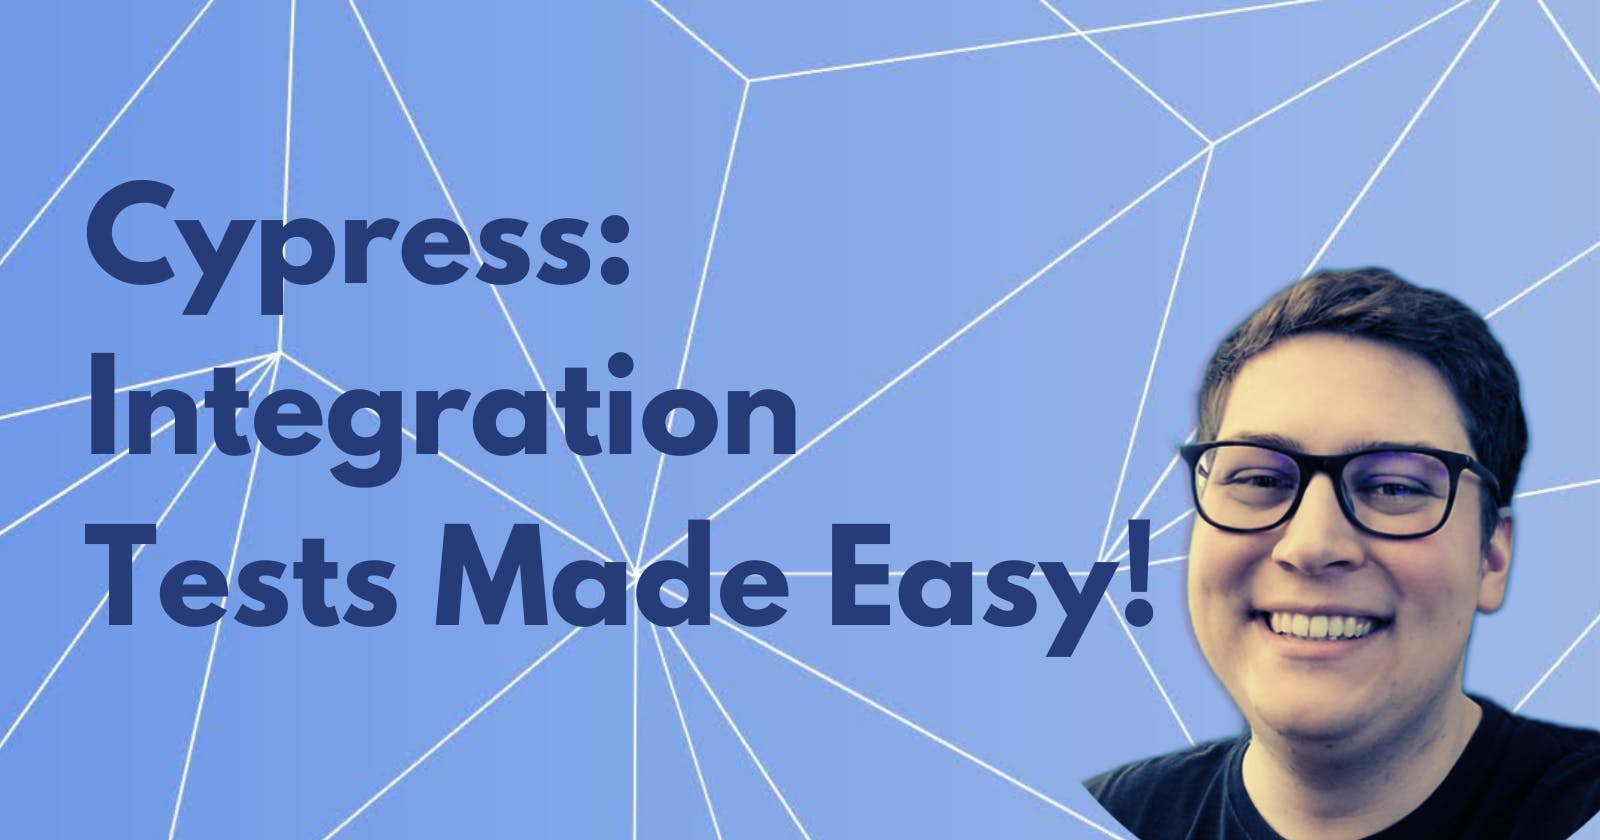 Cypress: Integration Tests Made Easy!